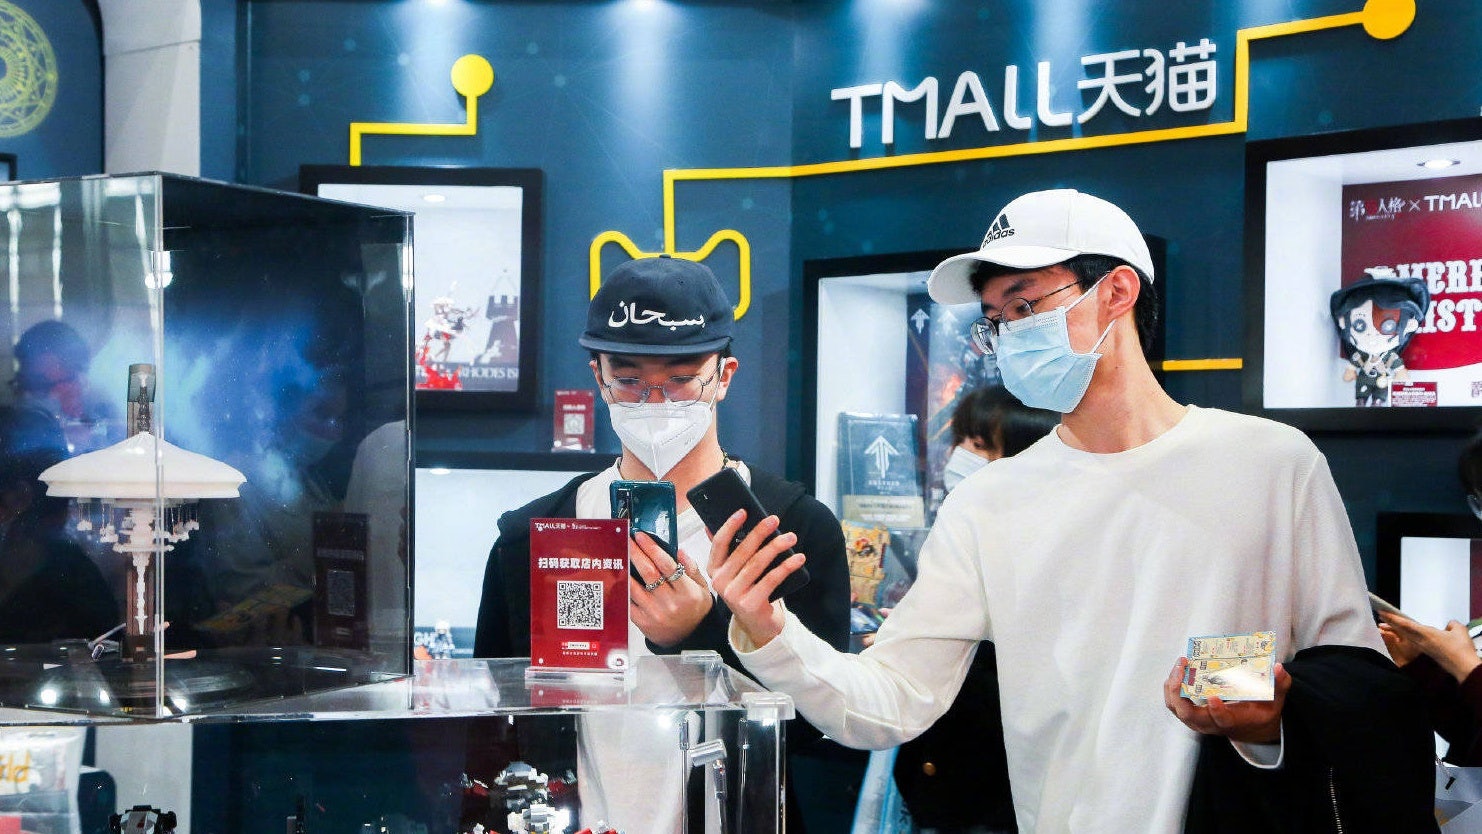 The Chinese e-commerce market is forecasted to reach $3 trillion by 2024, which isn’t a surprise considering the factors behind it. Photo: Courtesy of Tmall